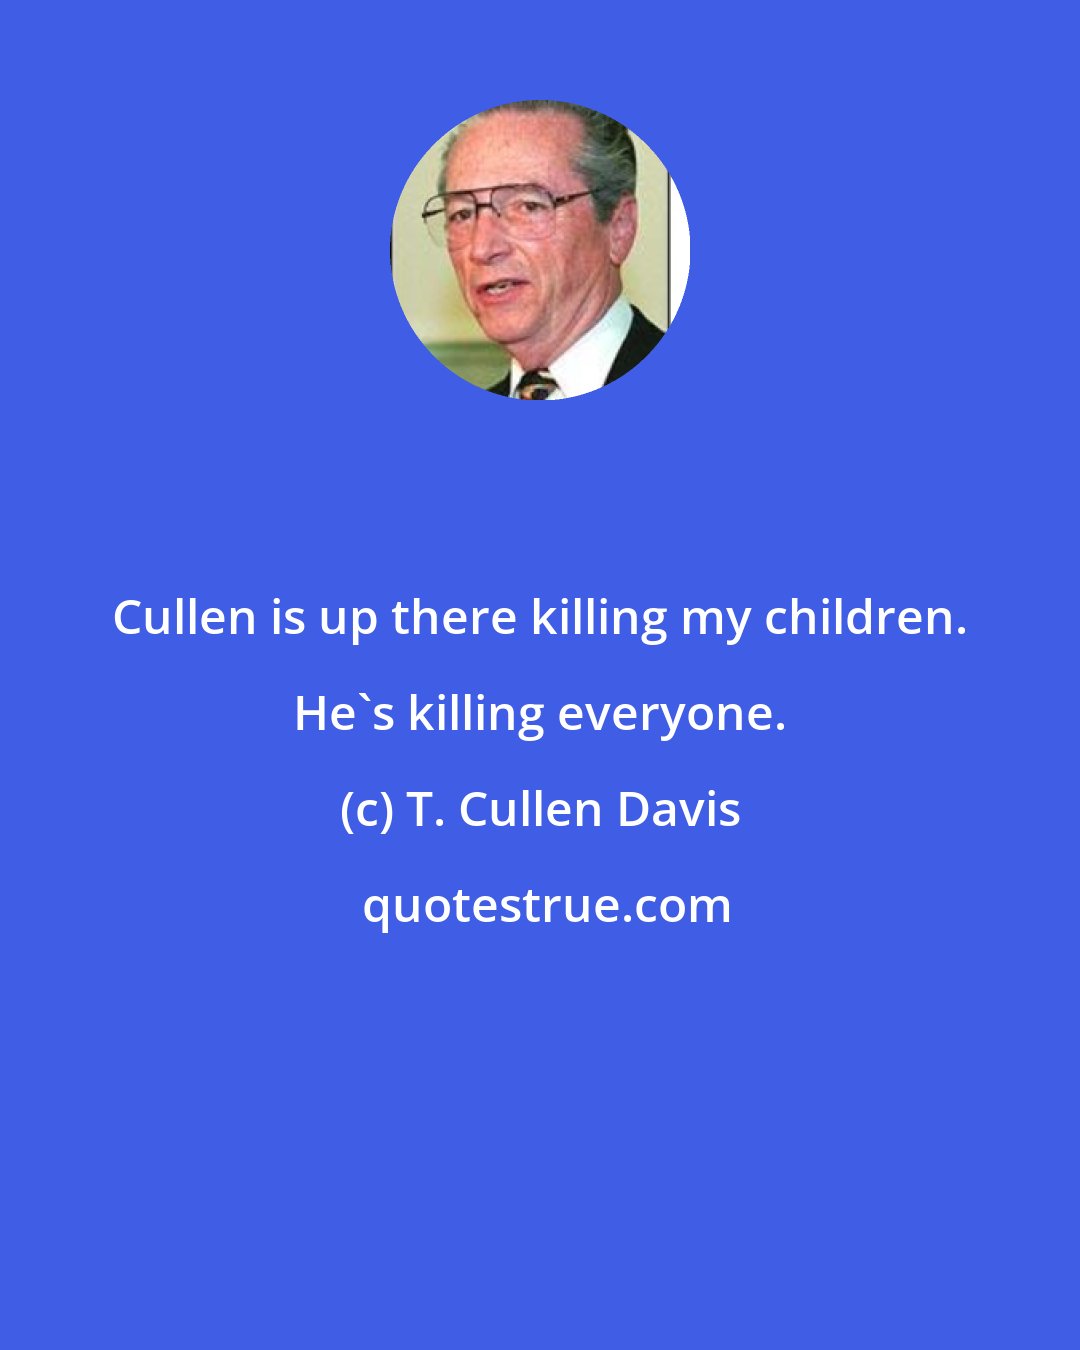 T. Cullen Davis: Cullen is up there killing my children. He's killing everyone.